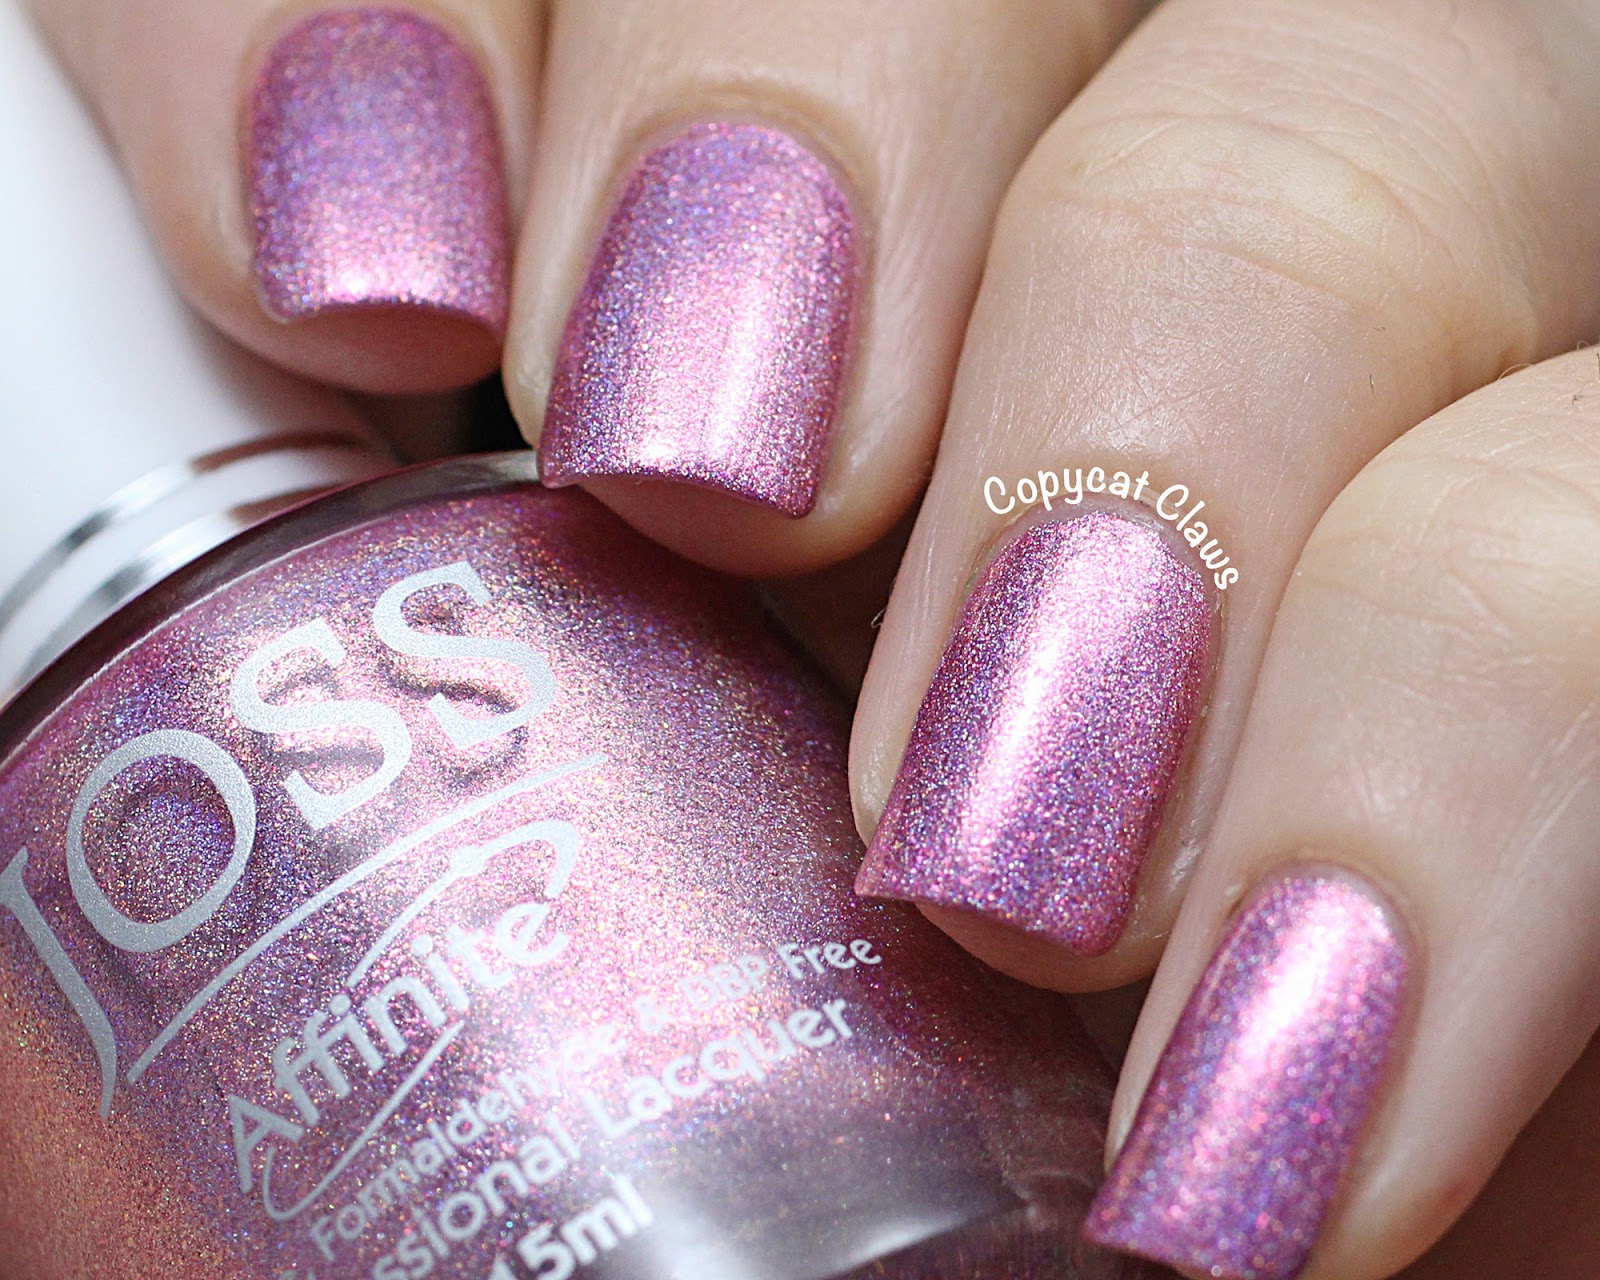 Copycat Claws: JOSS Nail Lacquer Review & Swatches